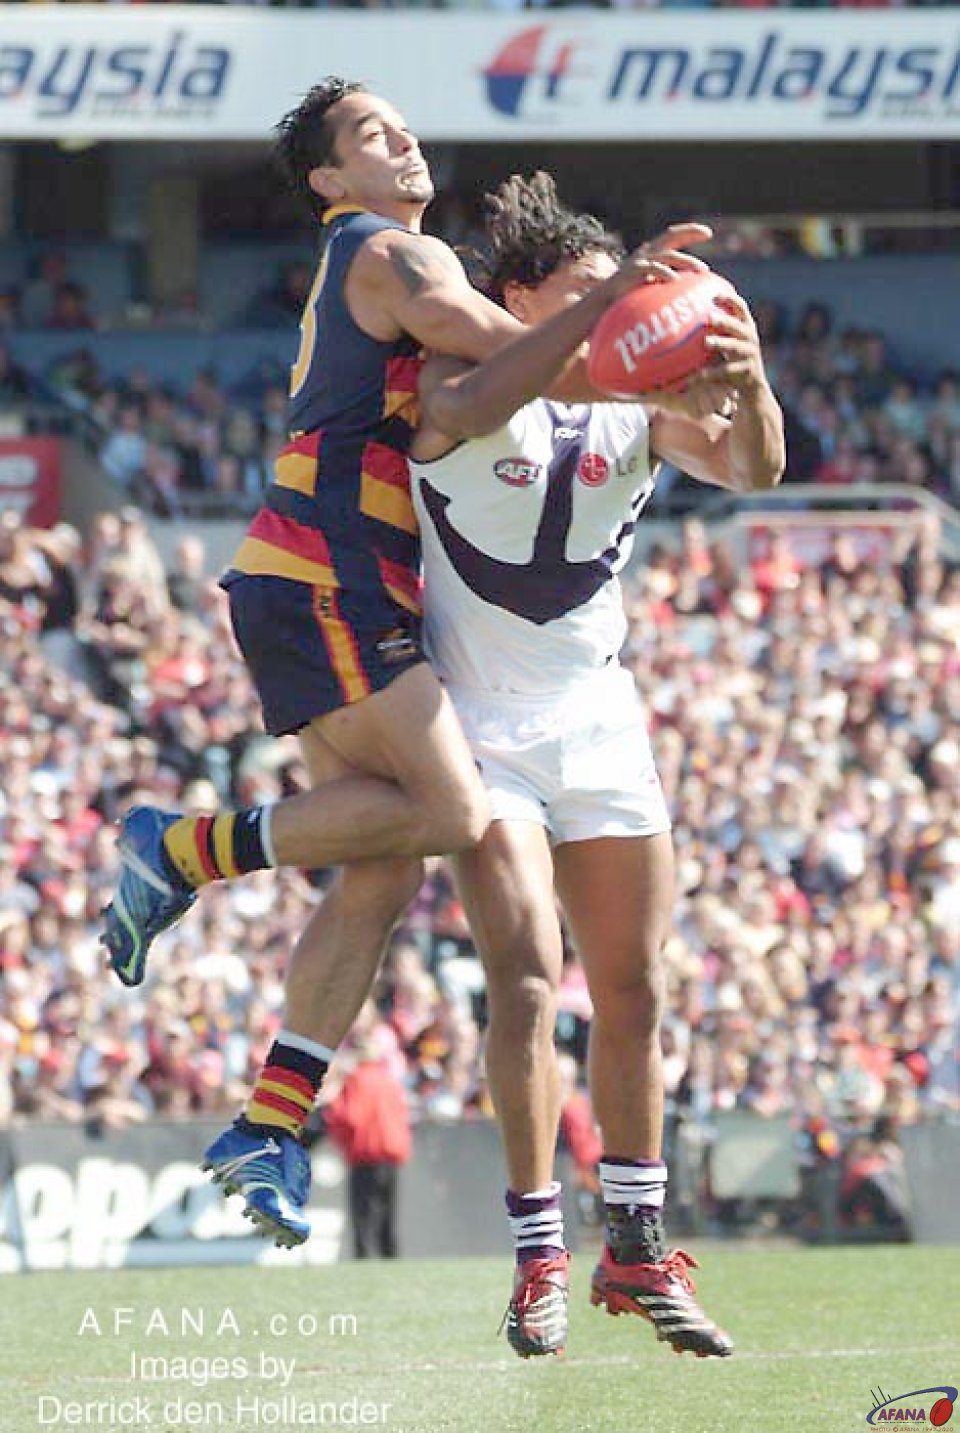 [b]The Docker's Troy Cook marks superbly under extreme pressure from the Crows defence[/b]